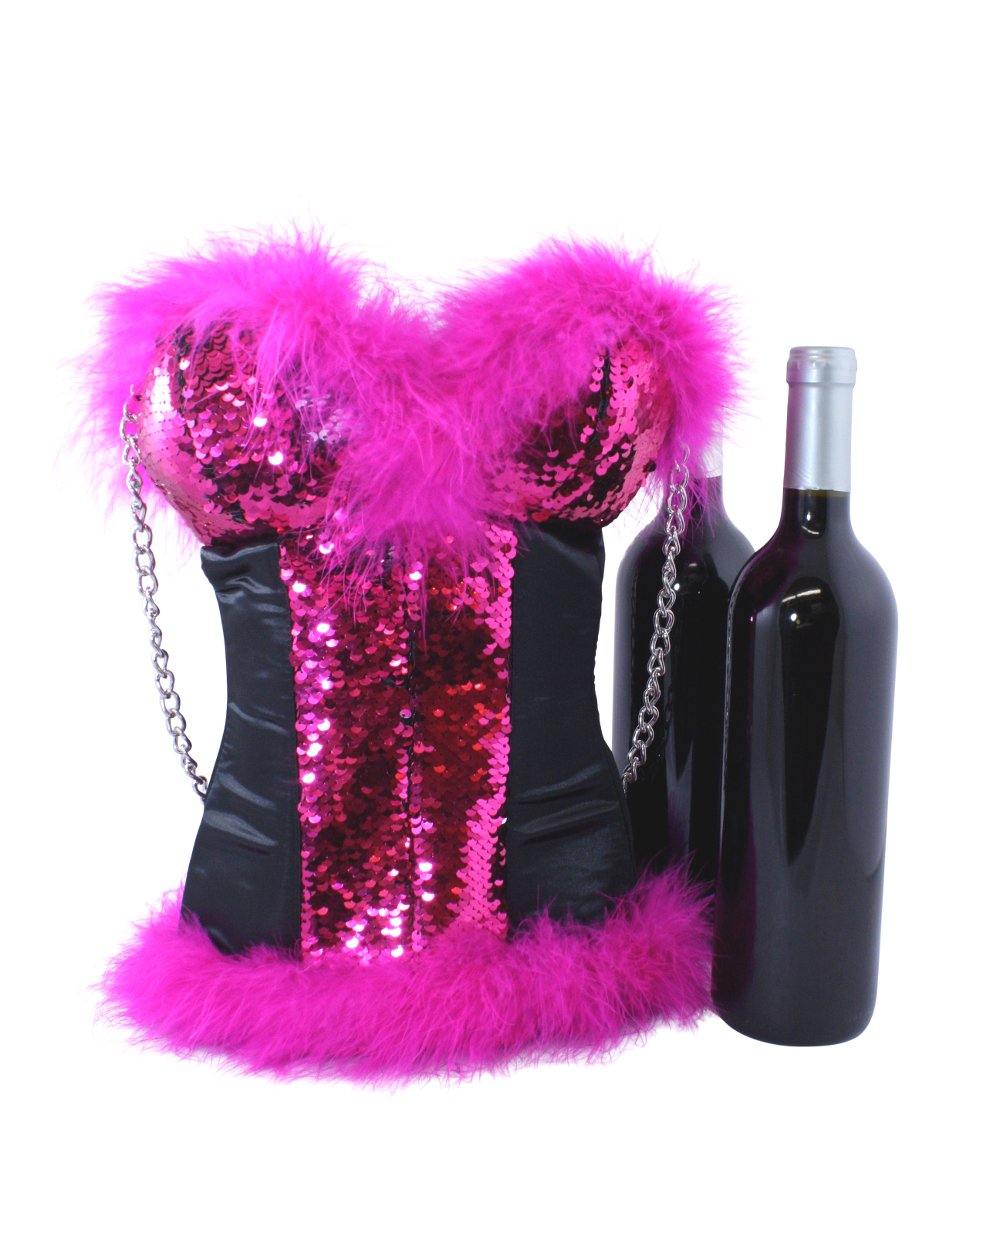 Corset Wine Bag in Hot Pink to Silver Reversible Sequins by Tipsy Totes